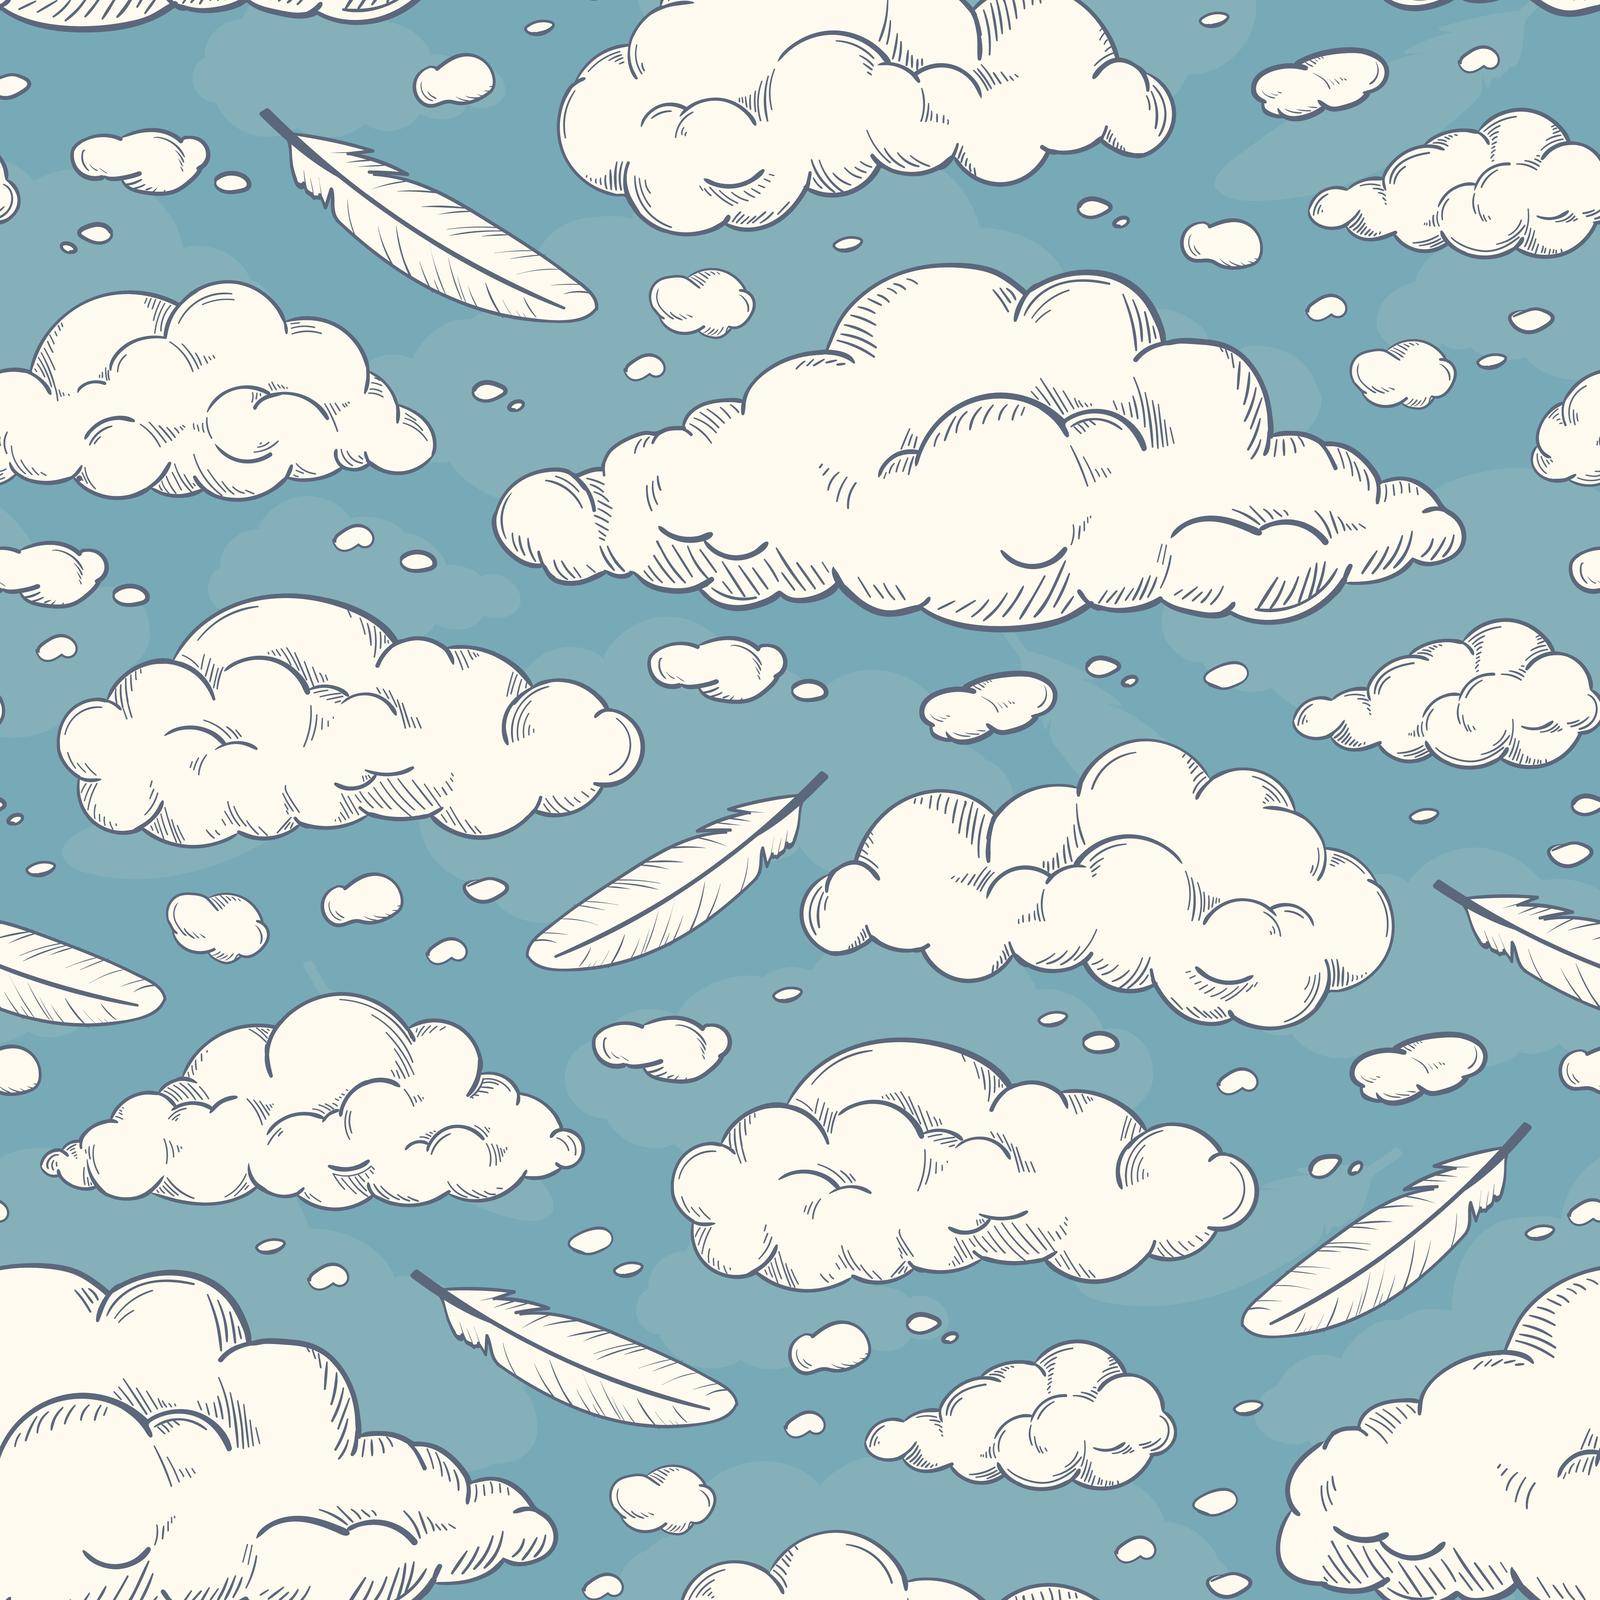 seamless repeating pattern of clouds